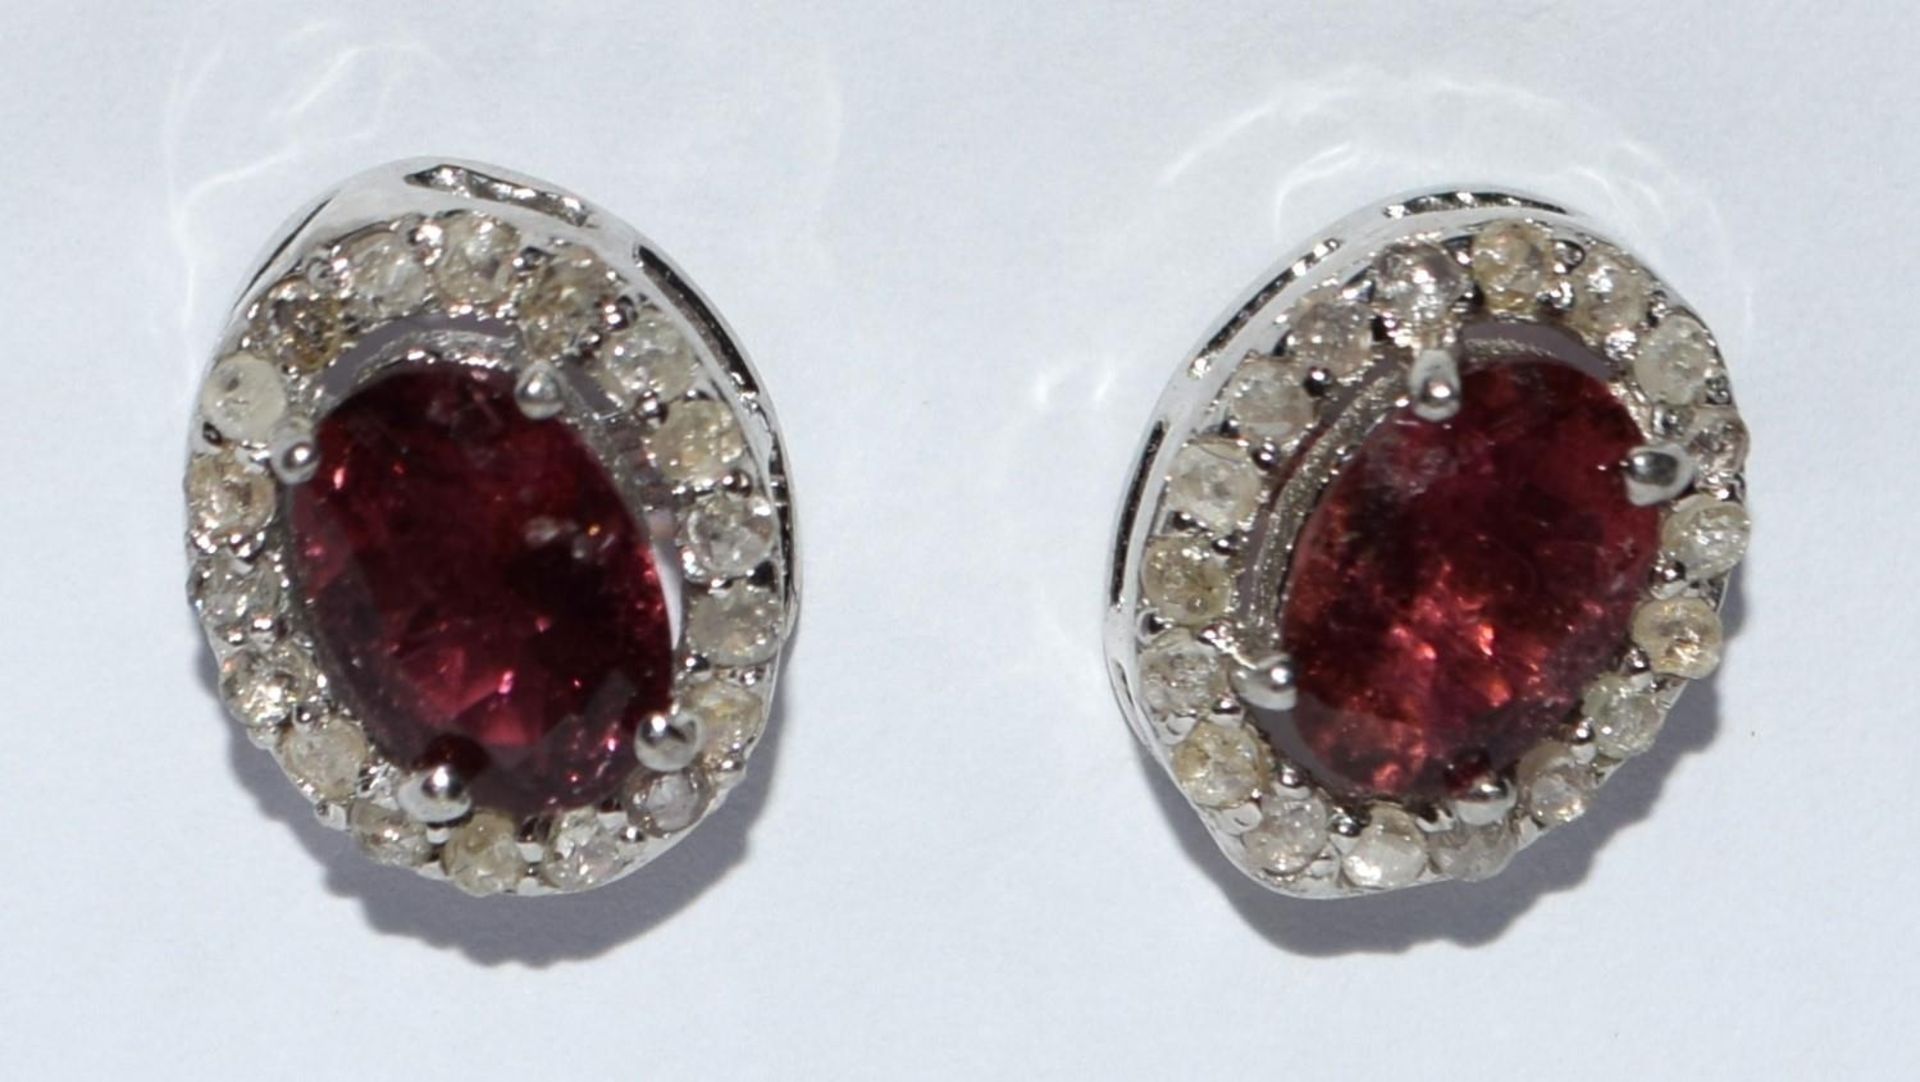 Diamond and pink tourmaline stud earrings with 18ct gold posts - Image 2 of 6